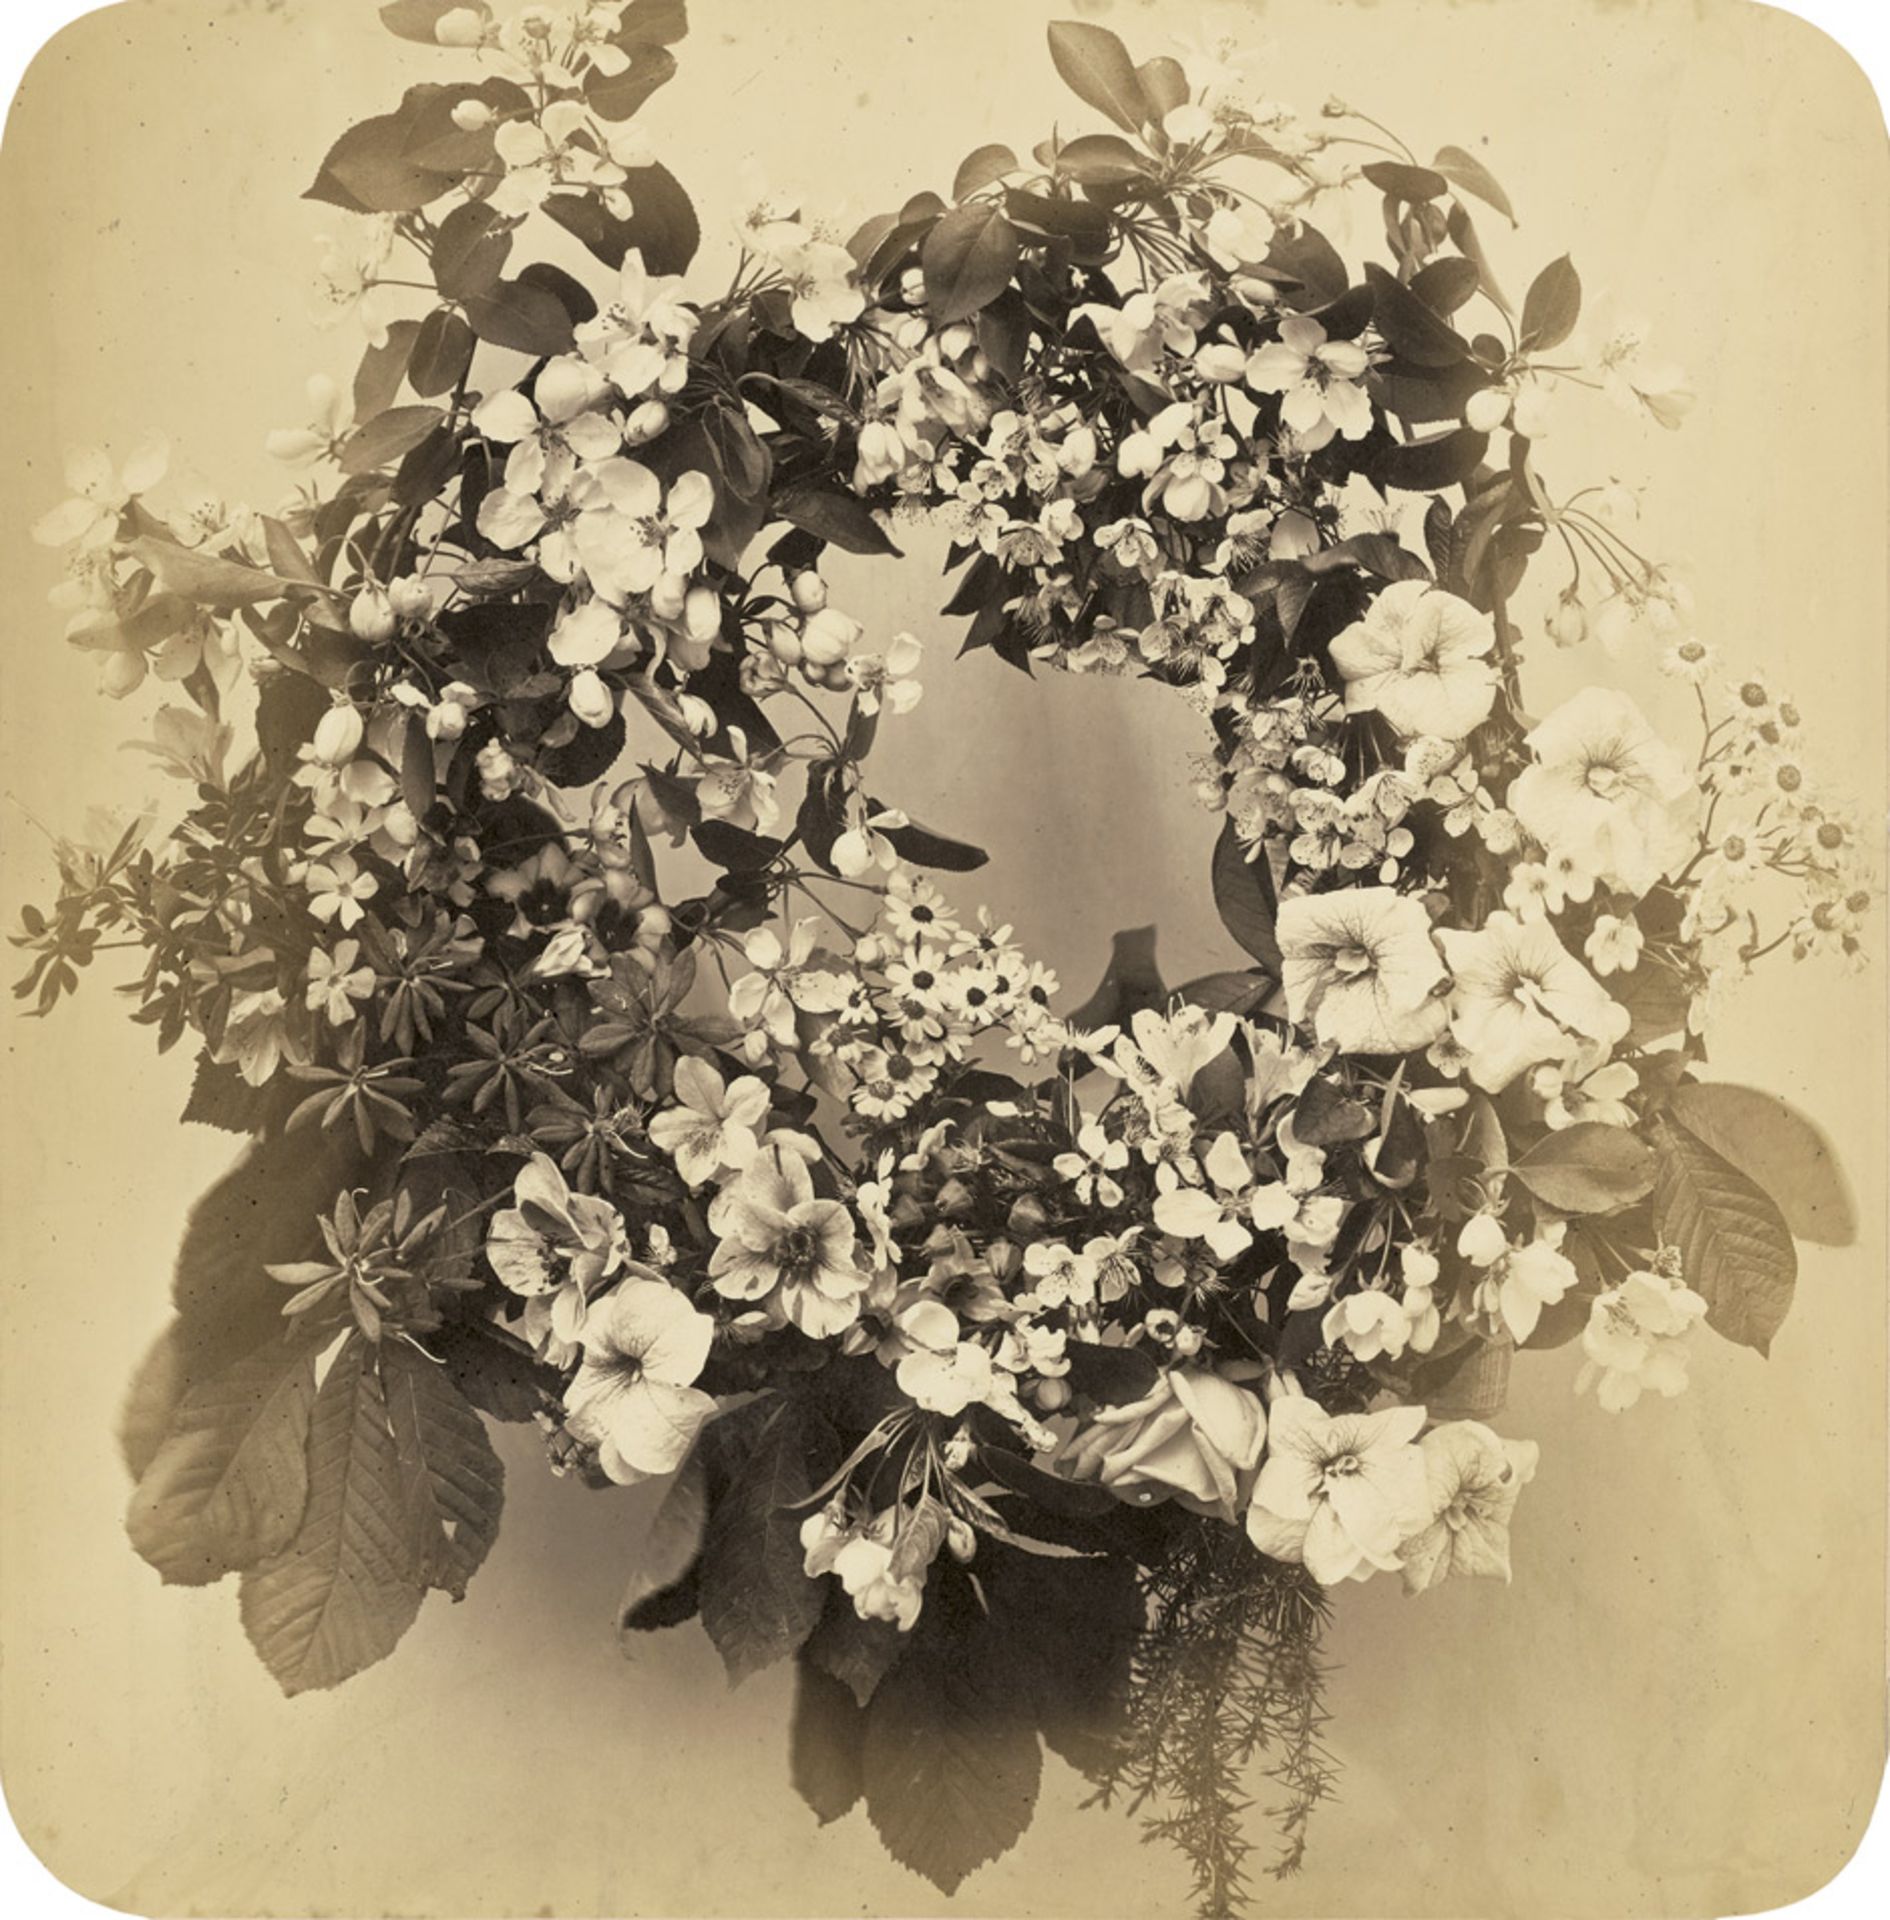 Braun, Adolphe: Flower wreathFlower wreath. 1850s. Varnished albumen print with rounded corners.